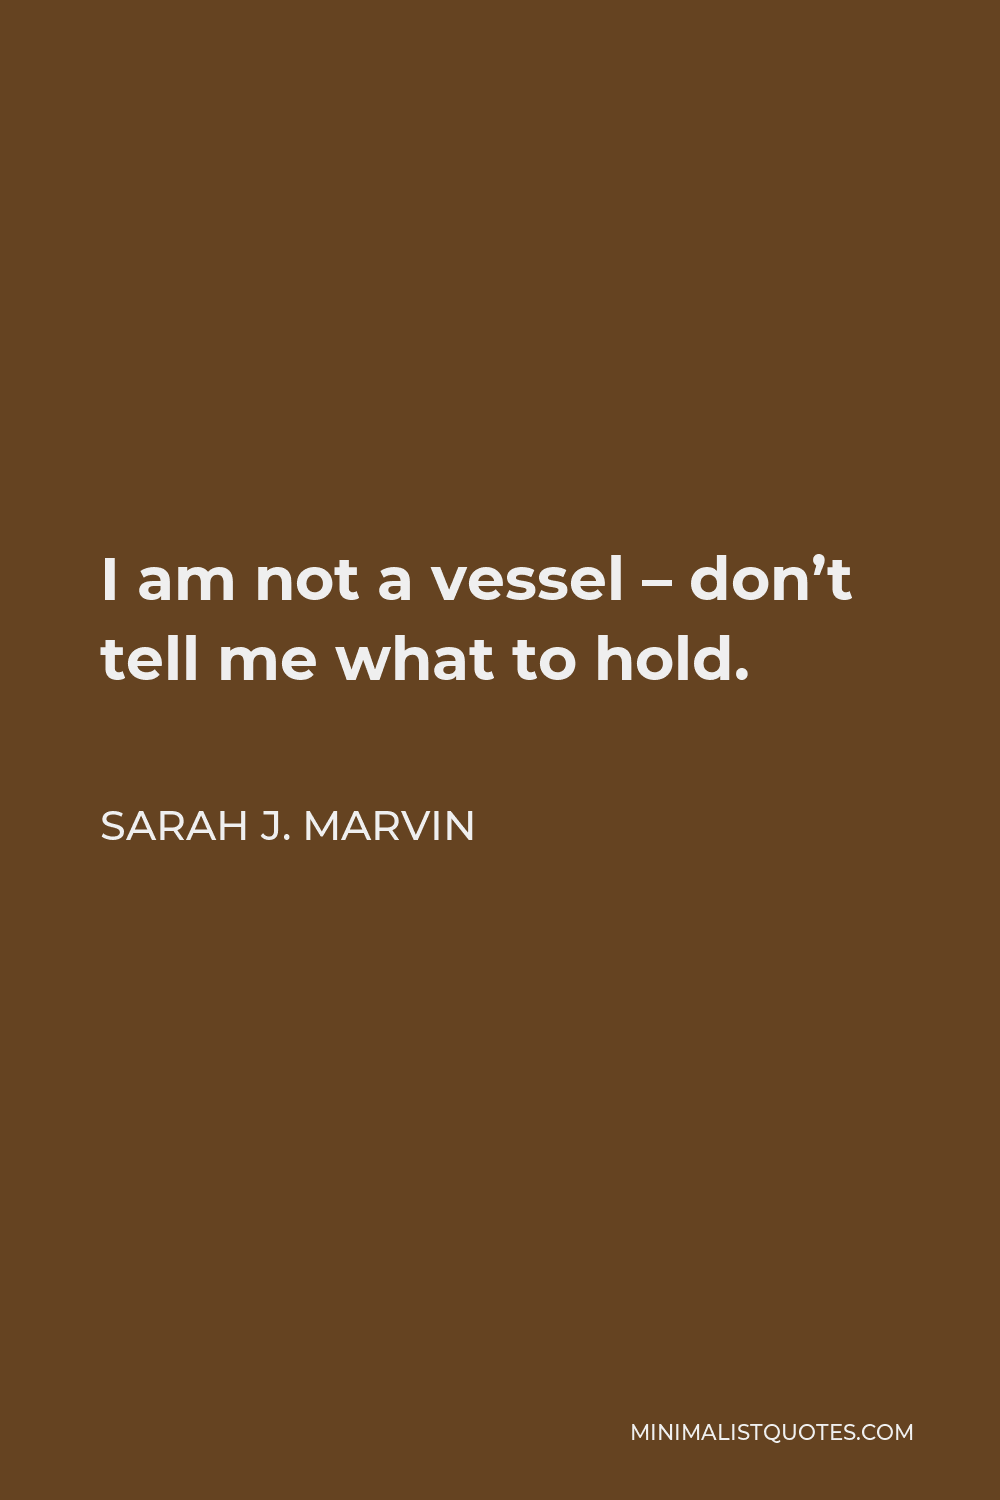 Sarah J. Marvin Quote - I am not a vessel – don’t tell me what to hold.